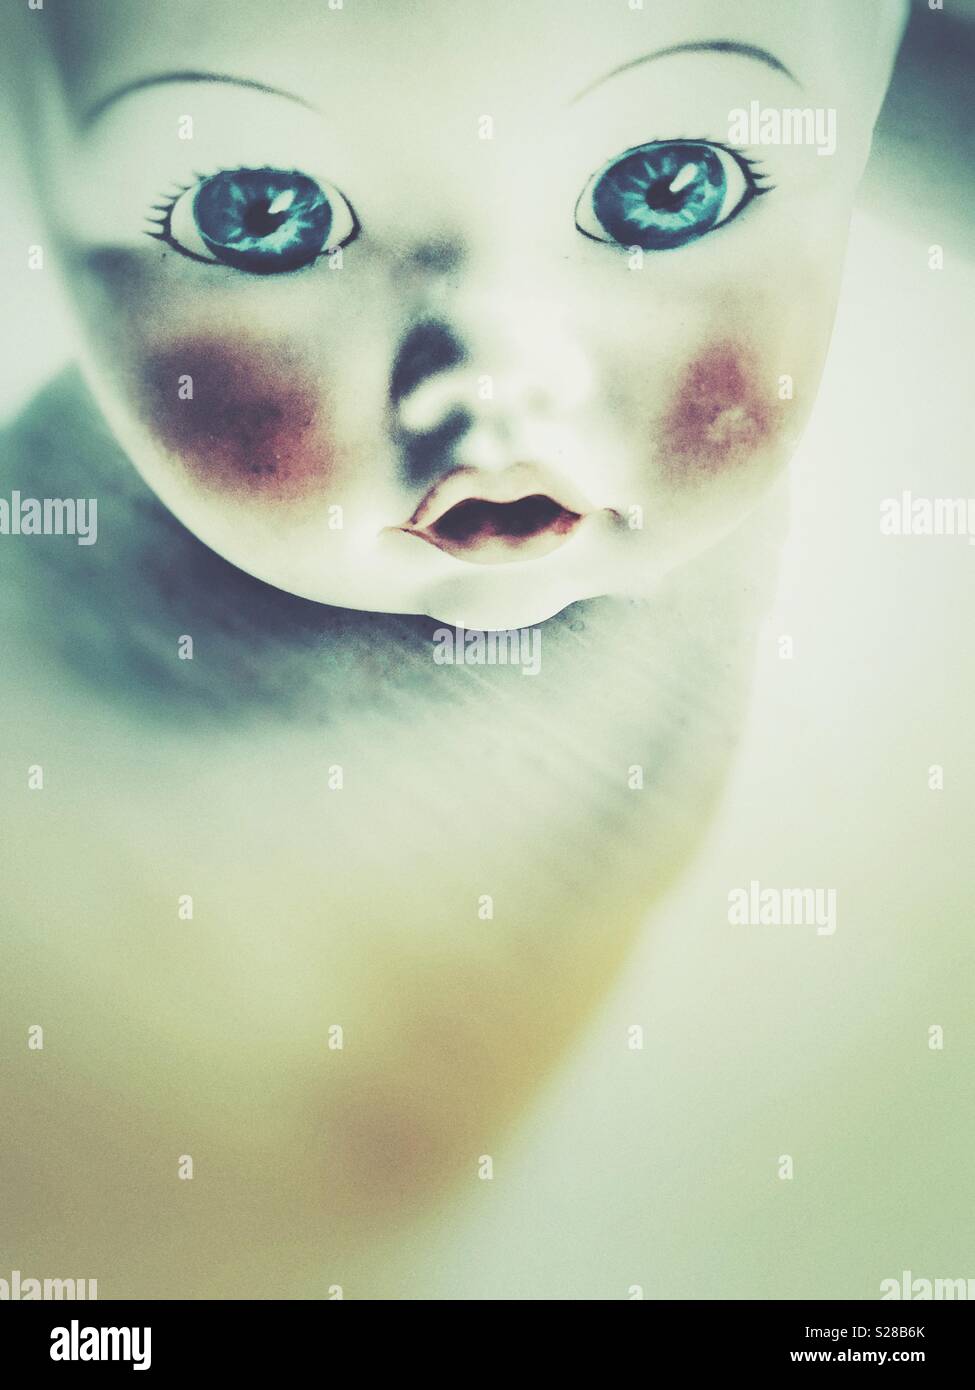 A baby doll head with big eyes and red cheeks Stock Photo